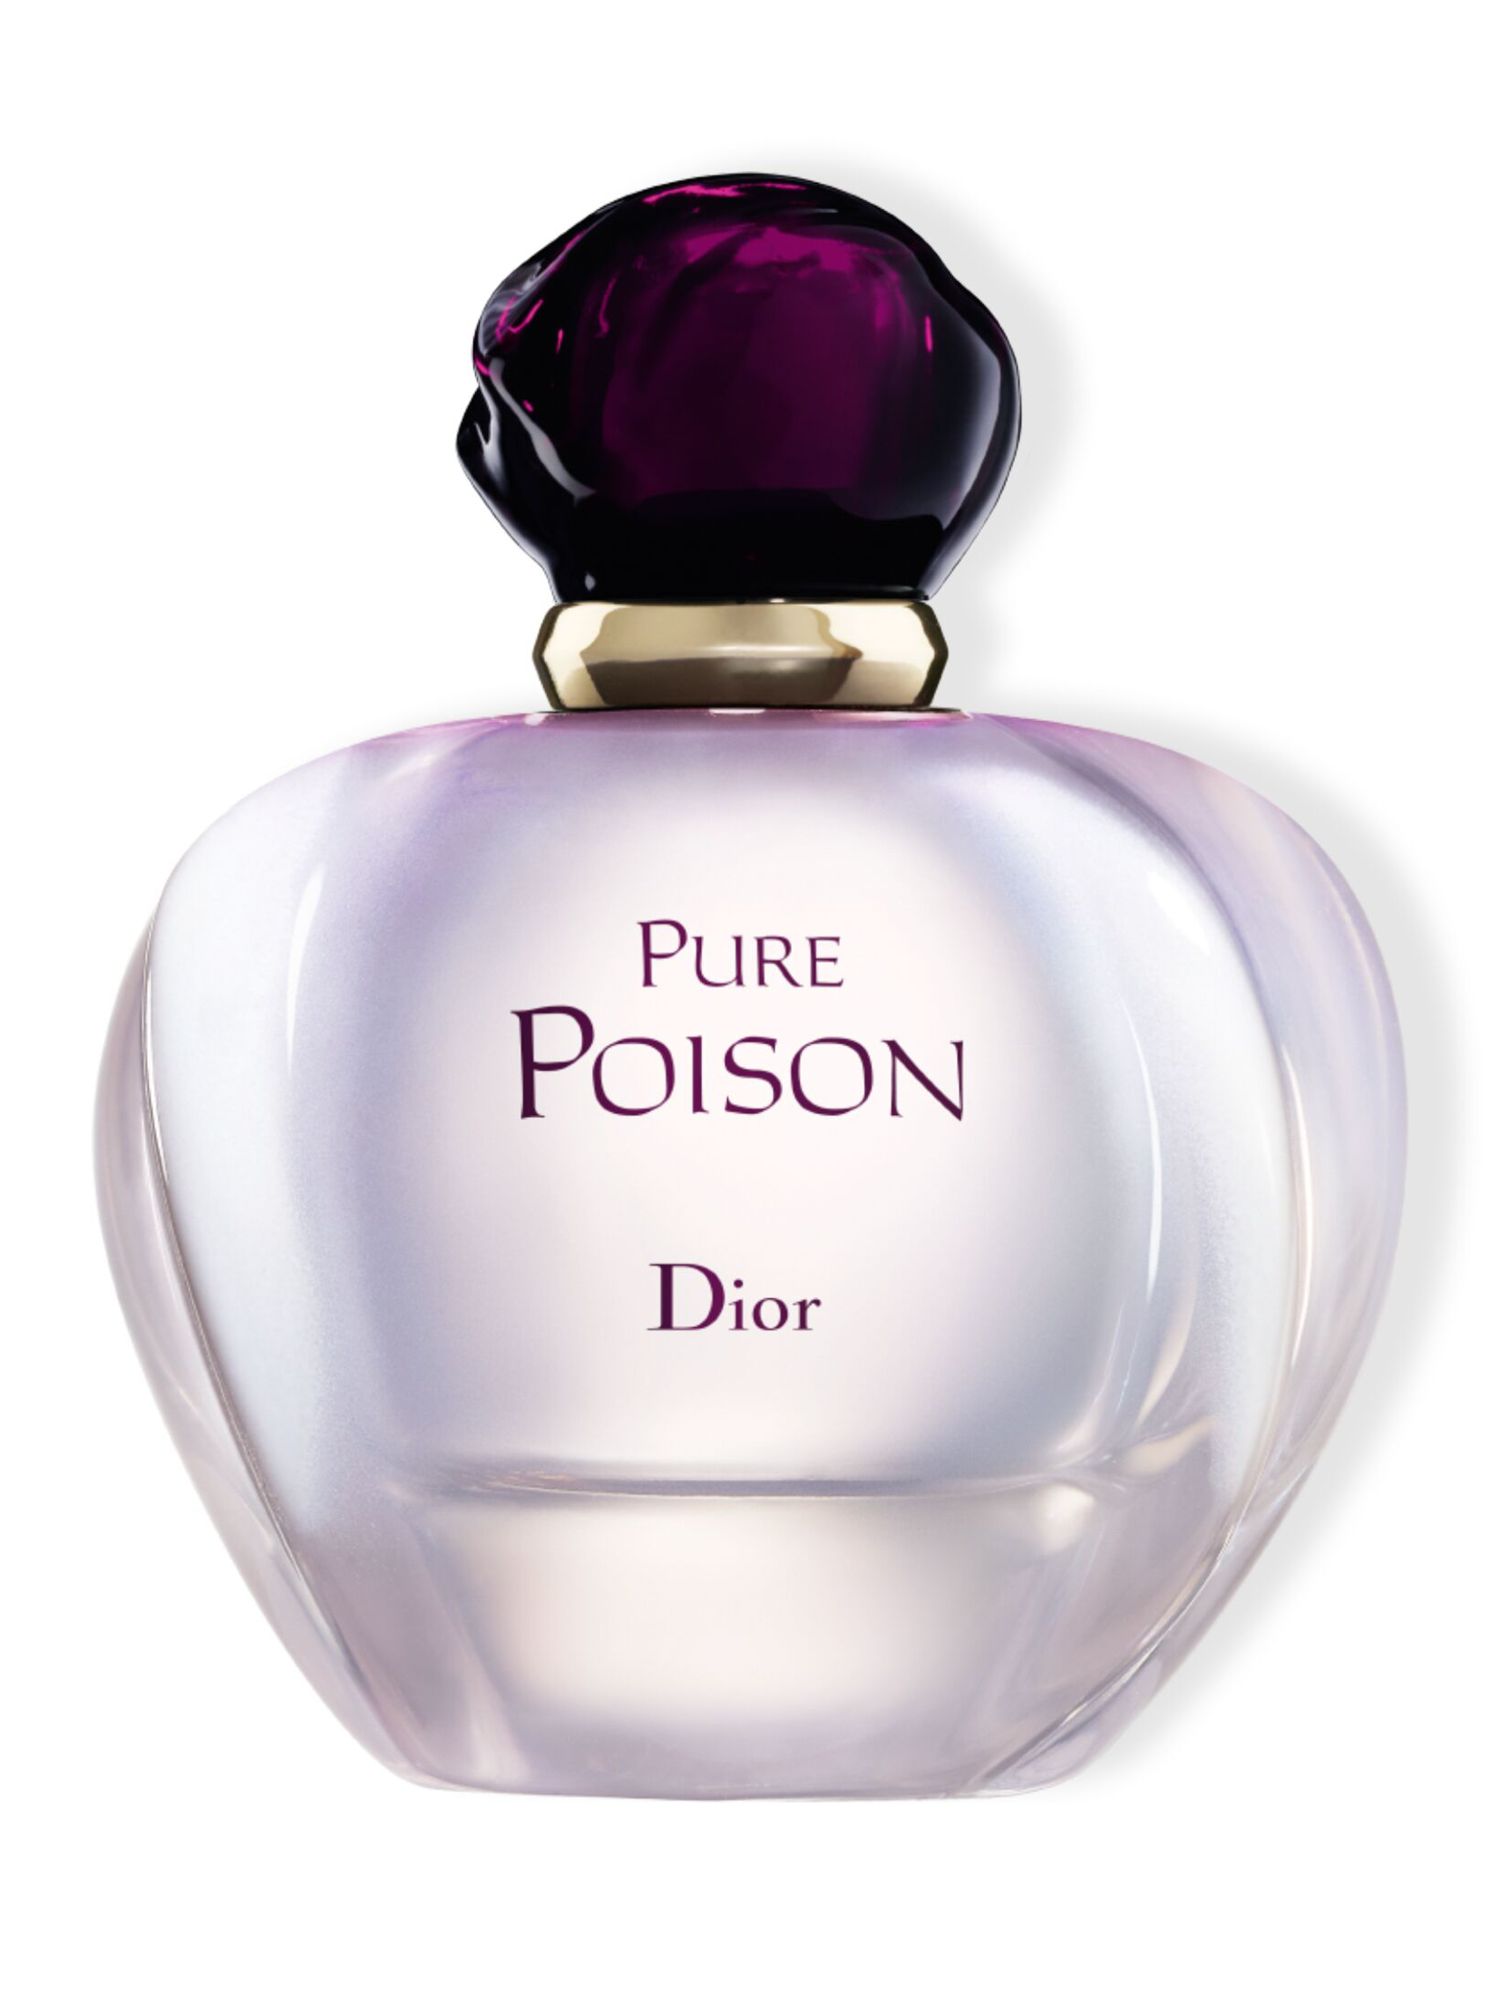 Give Pure Poison Eau de Parfum Spray for Her - Holiday Gift Idea